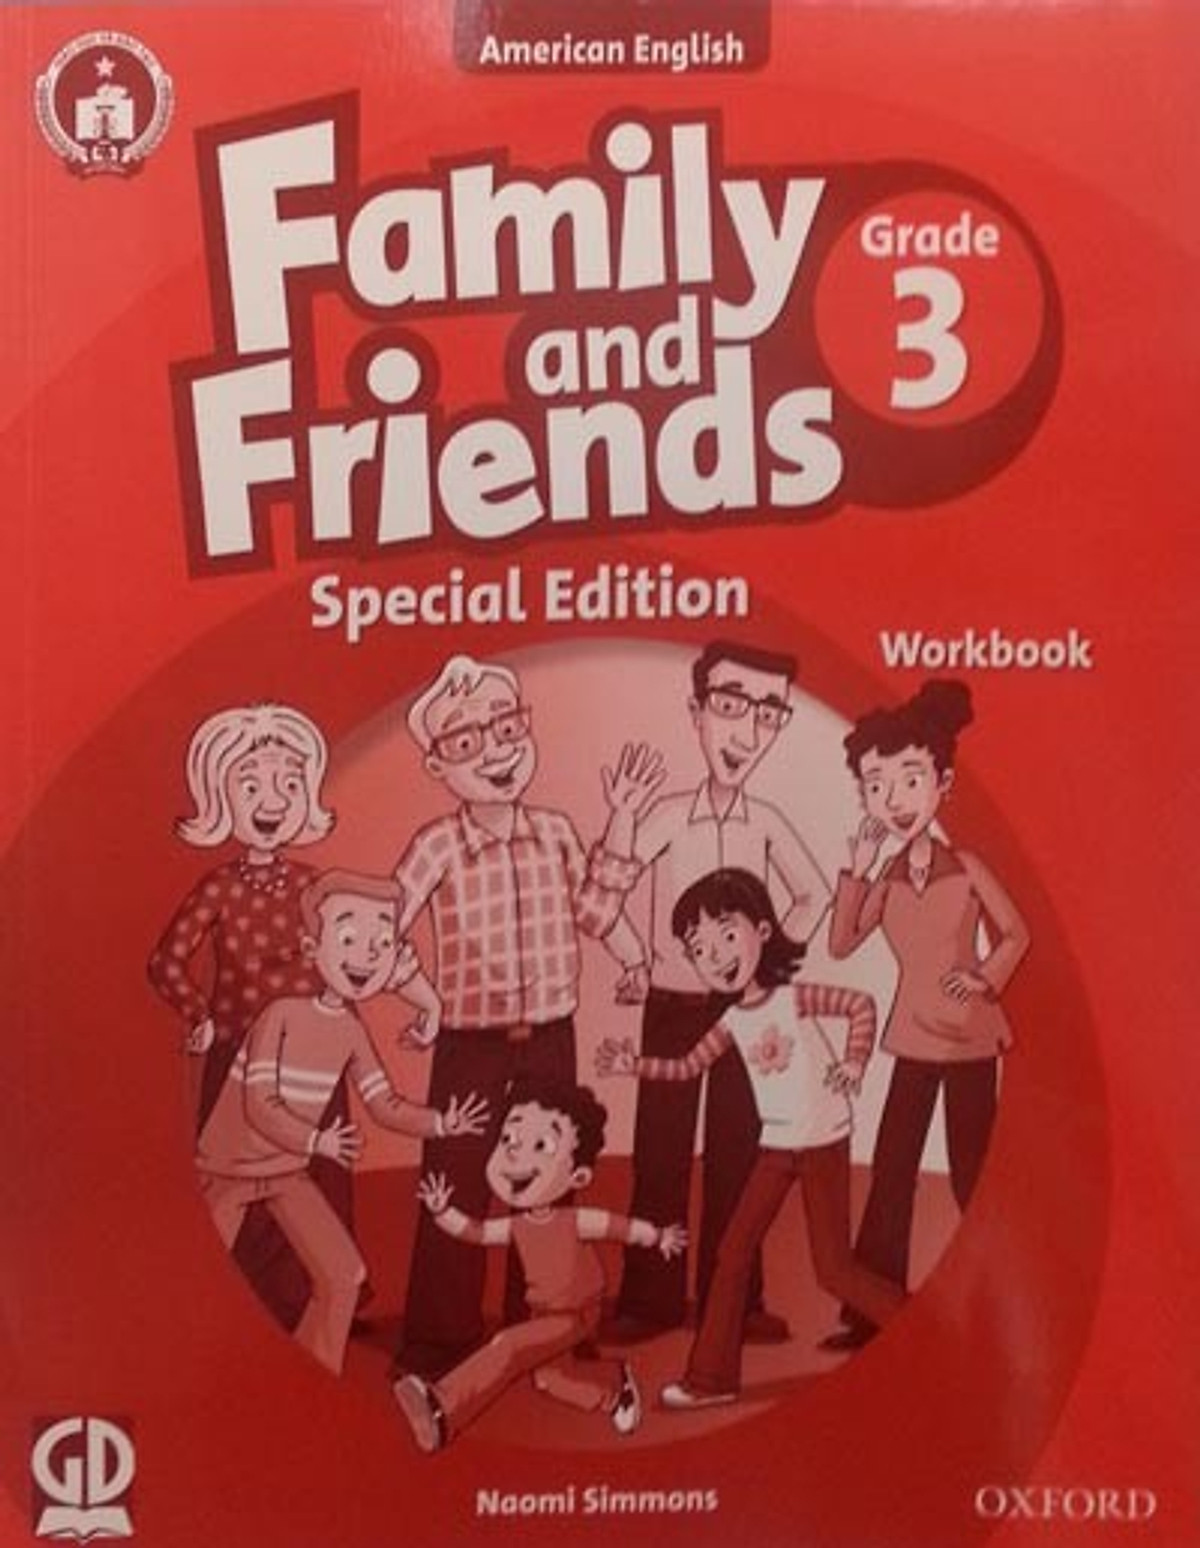 Family And Friends (Ame. Engligh) (Special Ed.) Grade 3: Workbook